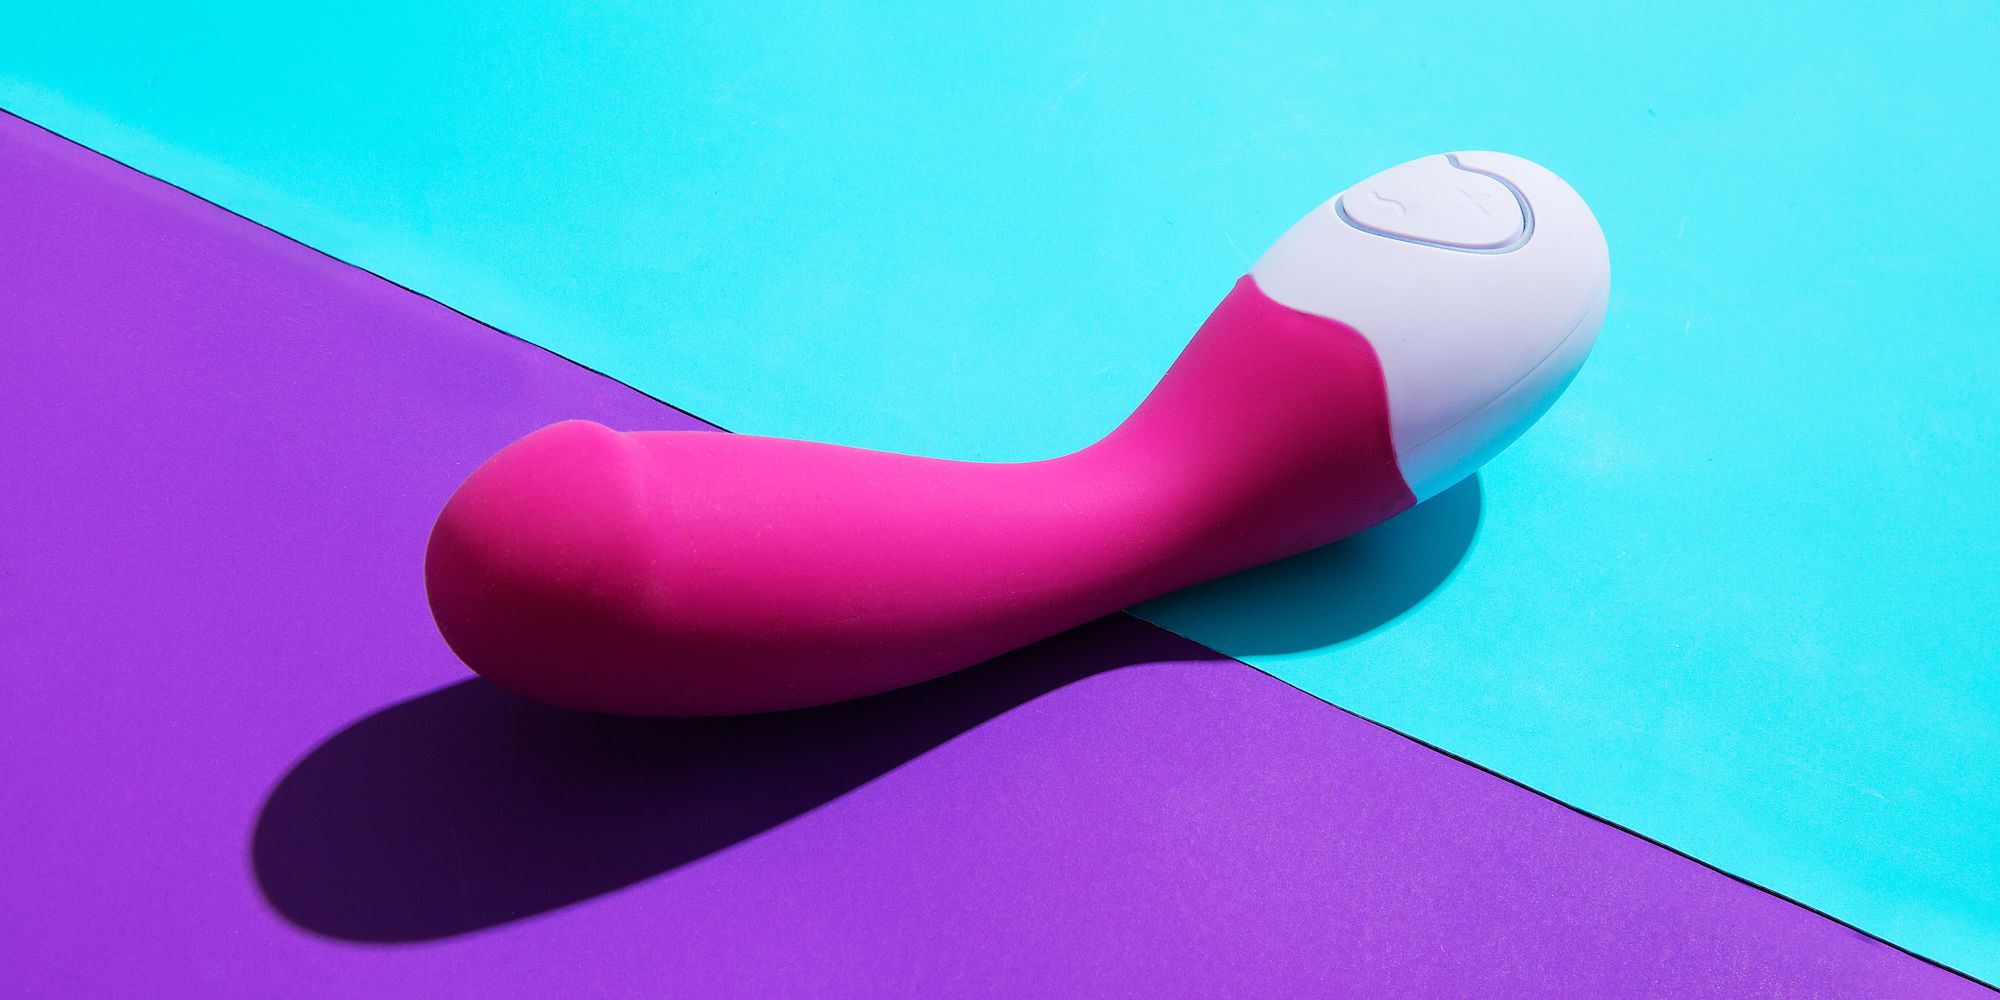 Vibrator On Clit Orgasm - How Does Using a Vibrator Affect Your Body?